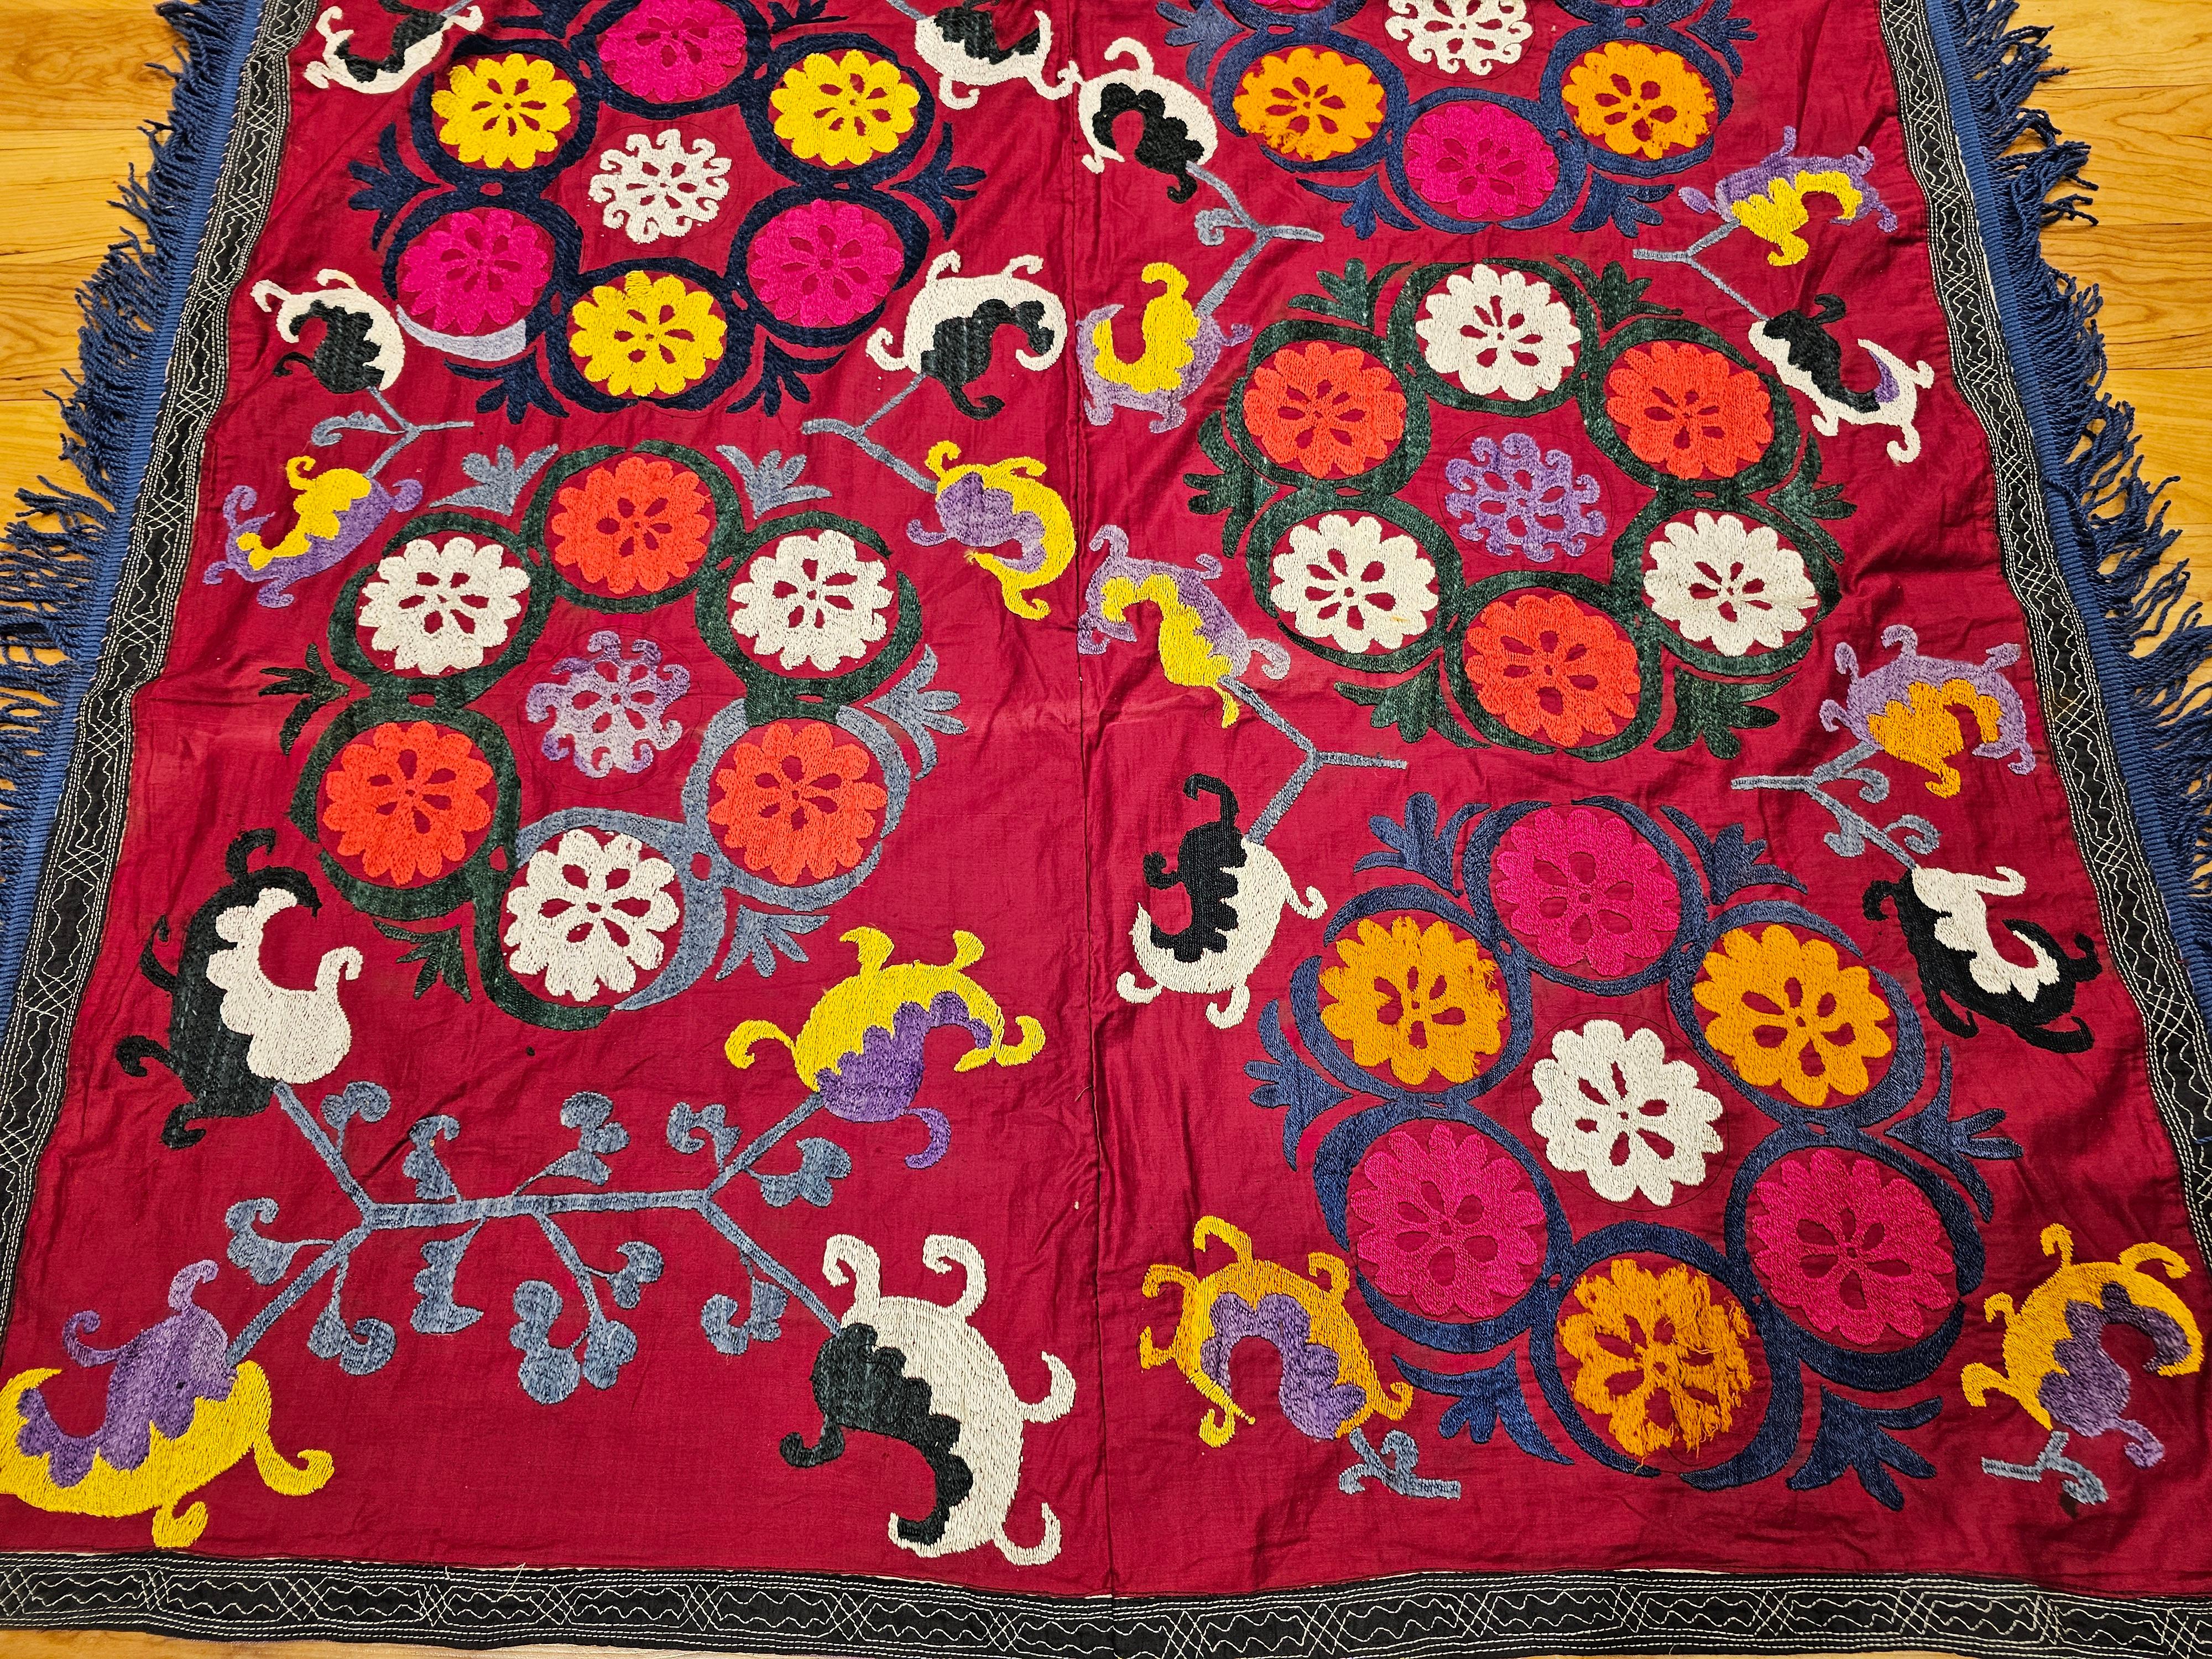 Hand-Crafted Vintage Uzbek Suzani Silk Embroidery in Red, Ivory, Blue, Yellow, Black, Purple For Sale